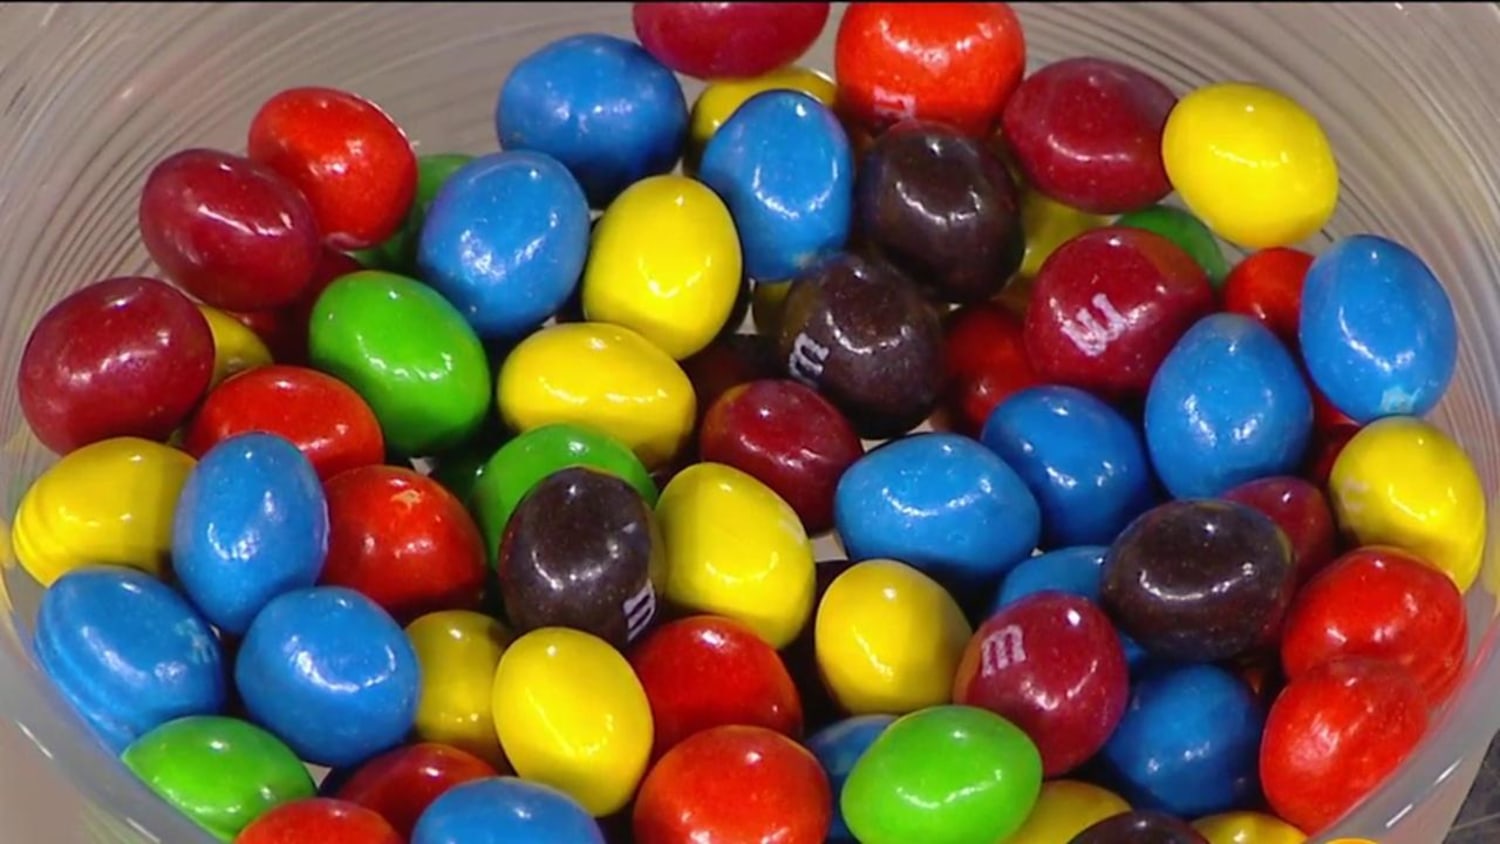 The Scoop': Which new international M&M flavor is your favorite